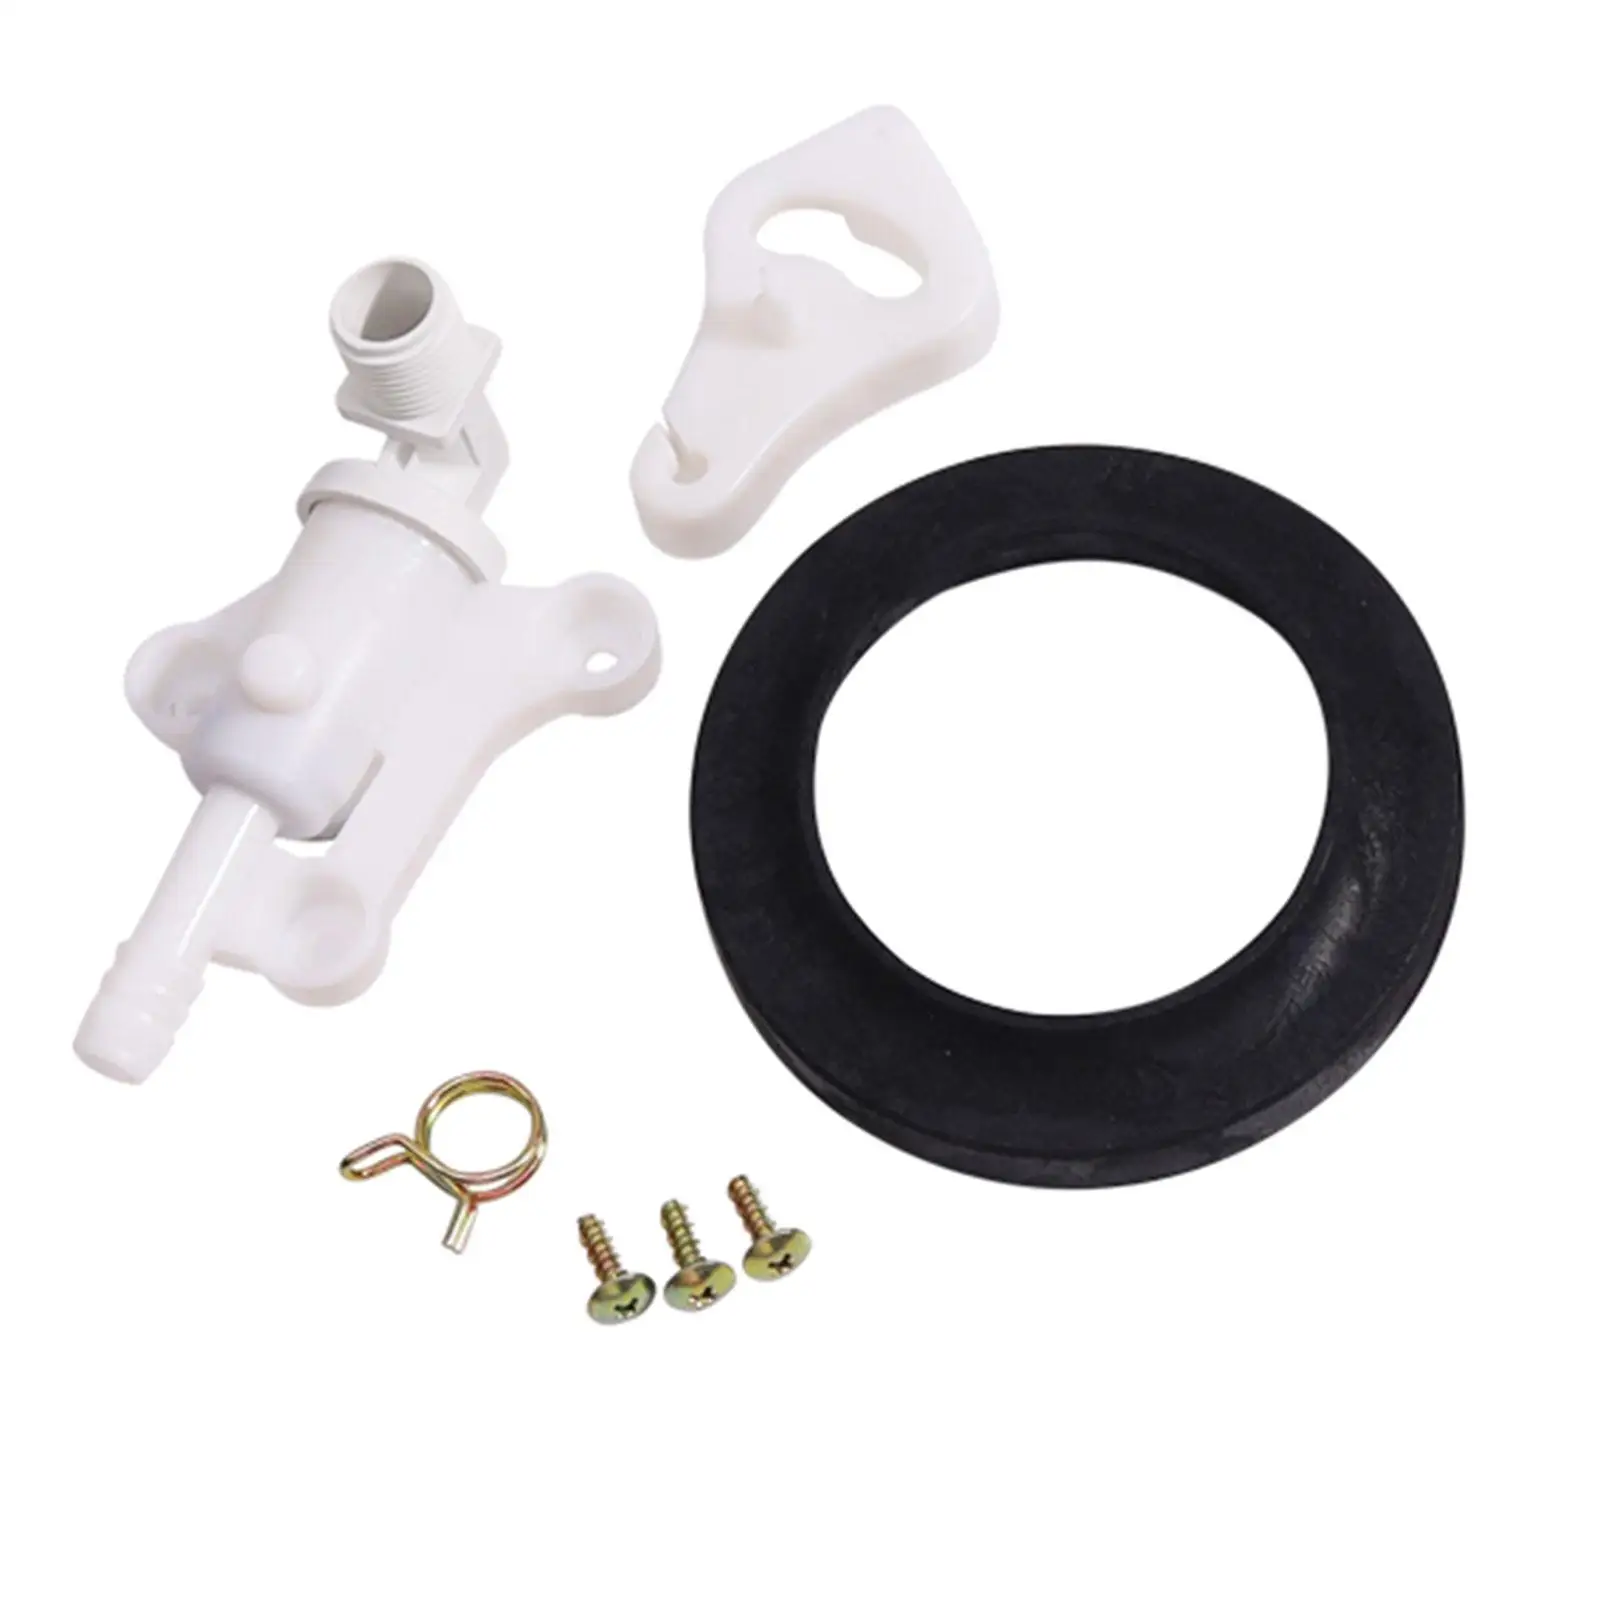 34100 Water Valve for Style Plus Toilets Replacements Accessories for Practical Easy to Install Durable Convenient